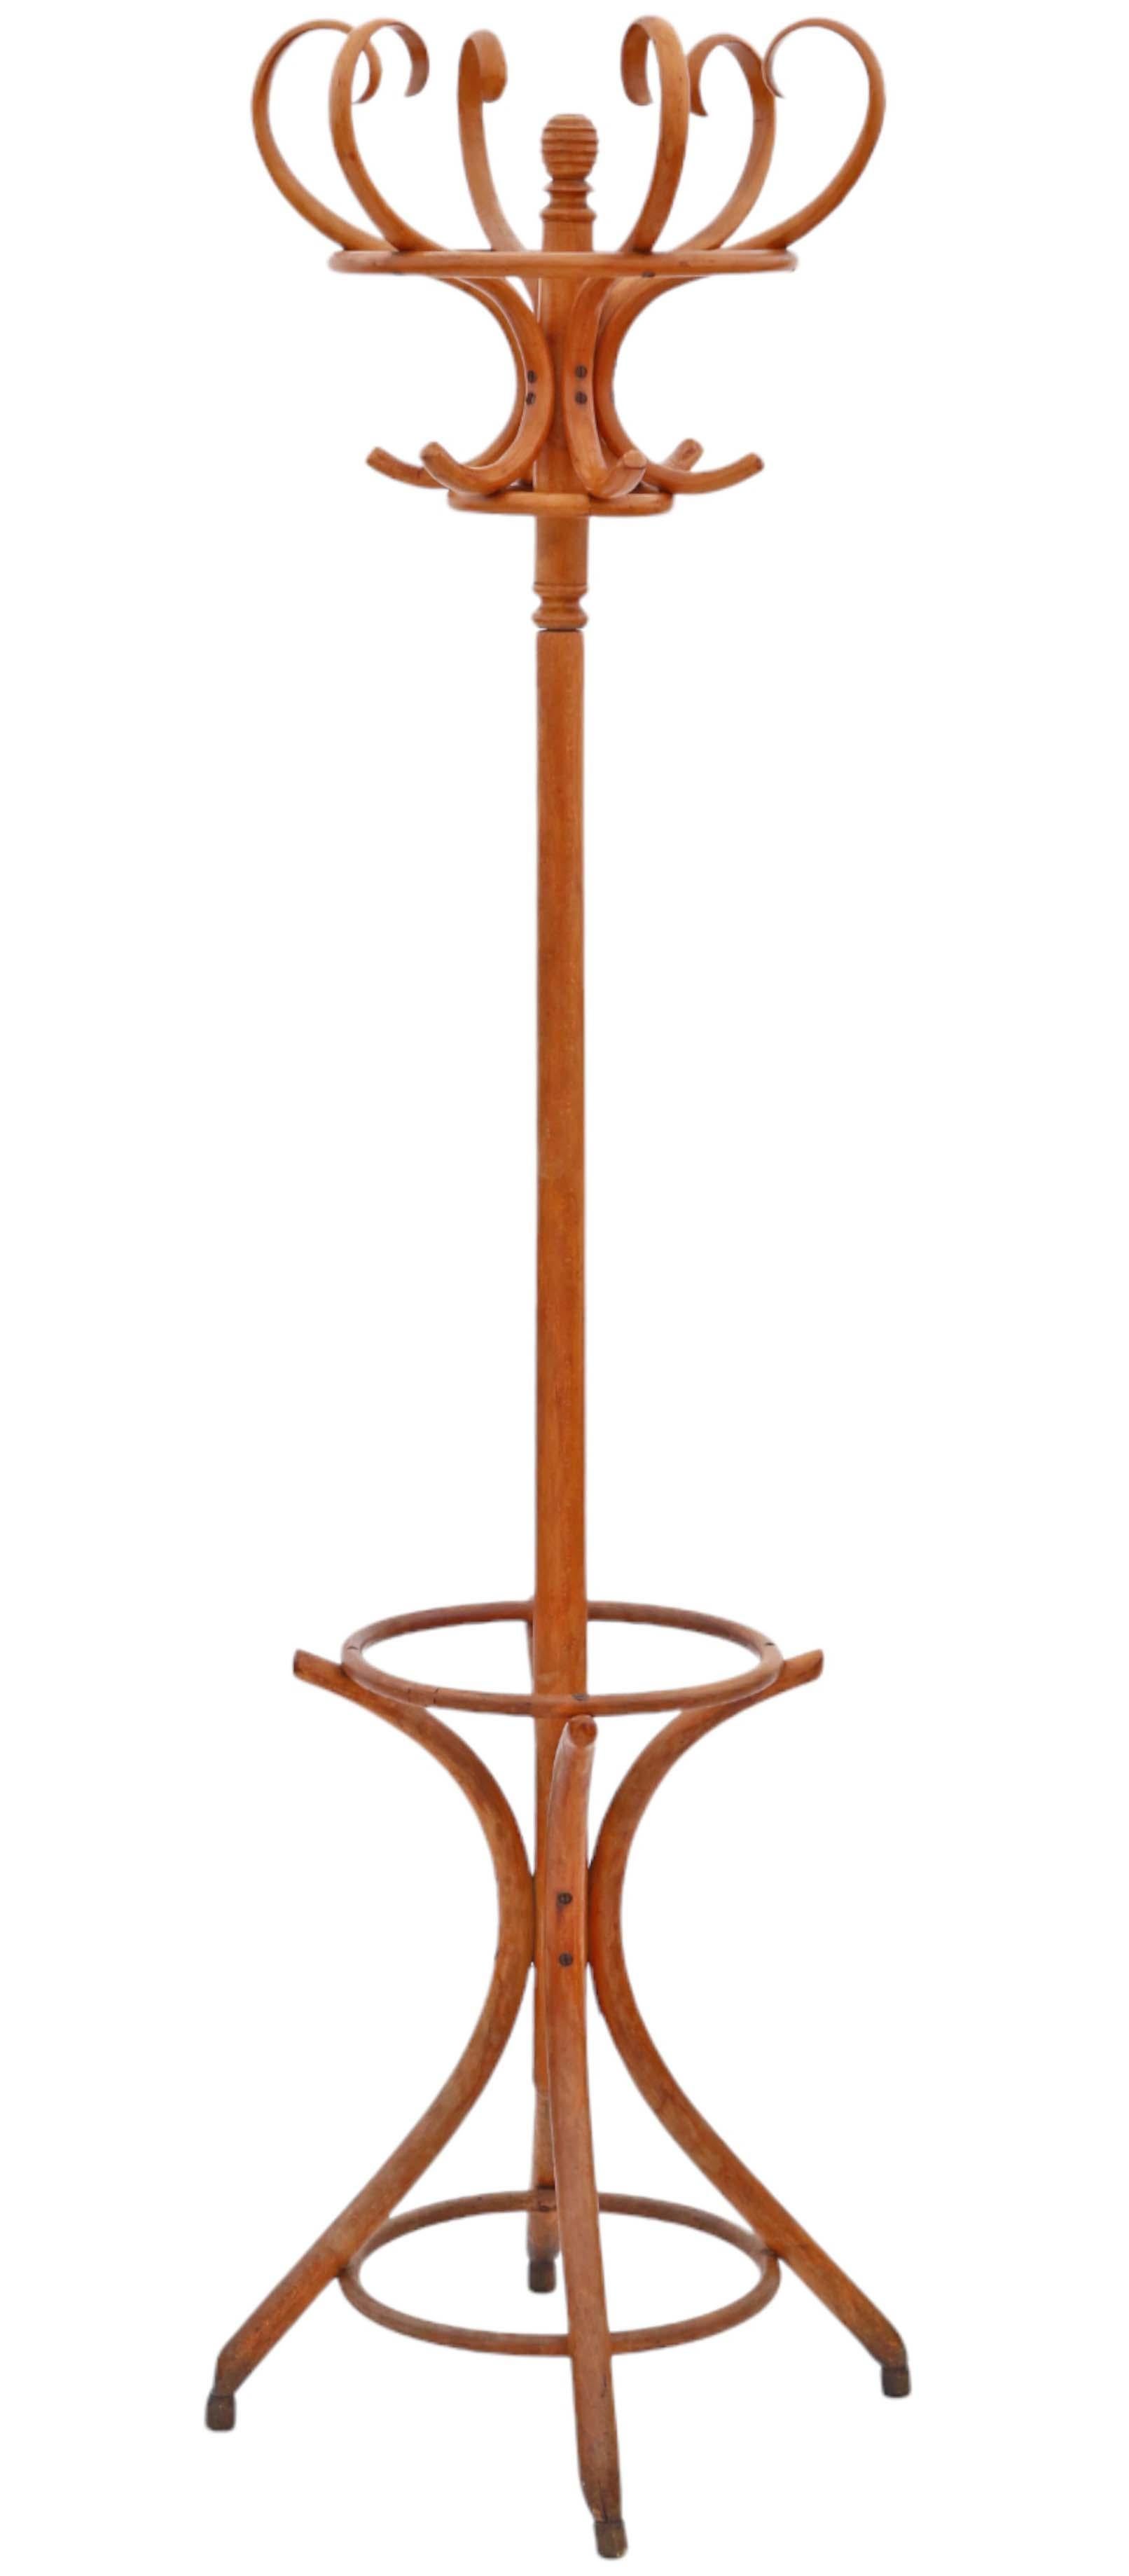 Mid-20th Century quality bentwood hall, coat, or hat stand with a vintage appeal.

Solid and sturdy, showing no signs of loose joints.

Maximum dimensions:

Top diameter: 51cm
Base diameter: 60cm
Height: 199cm

The item is in good condition,